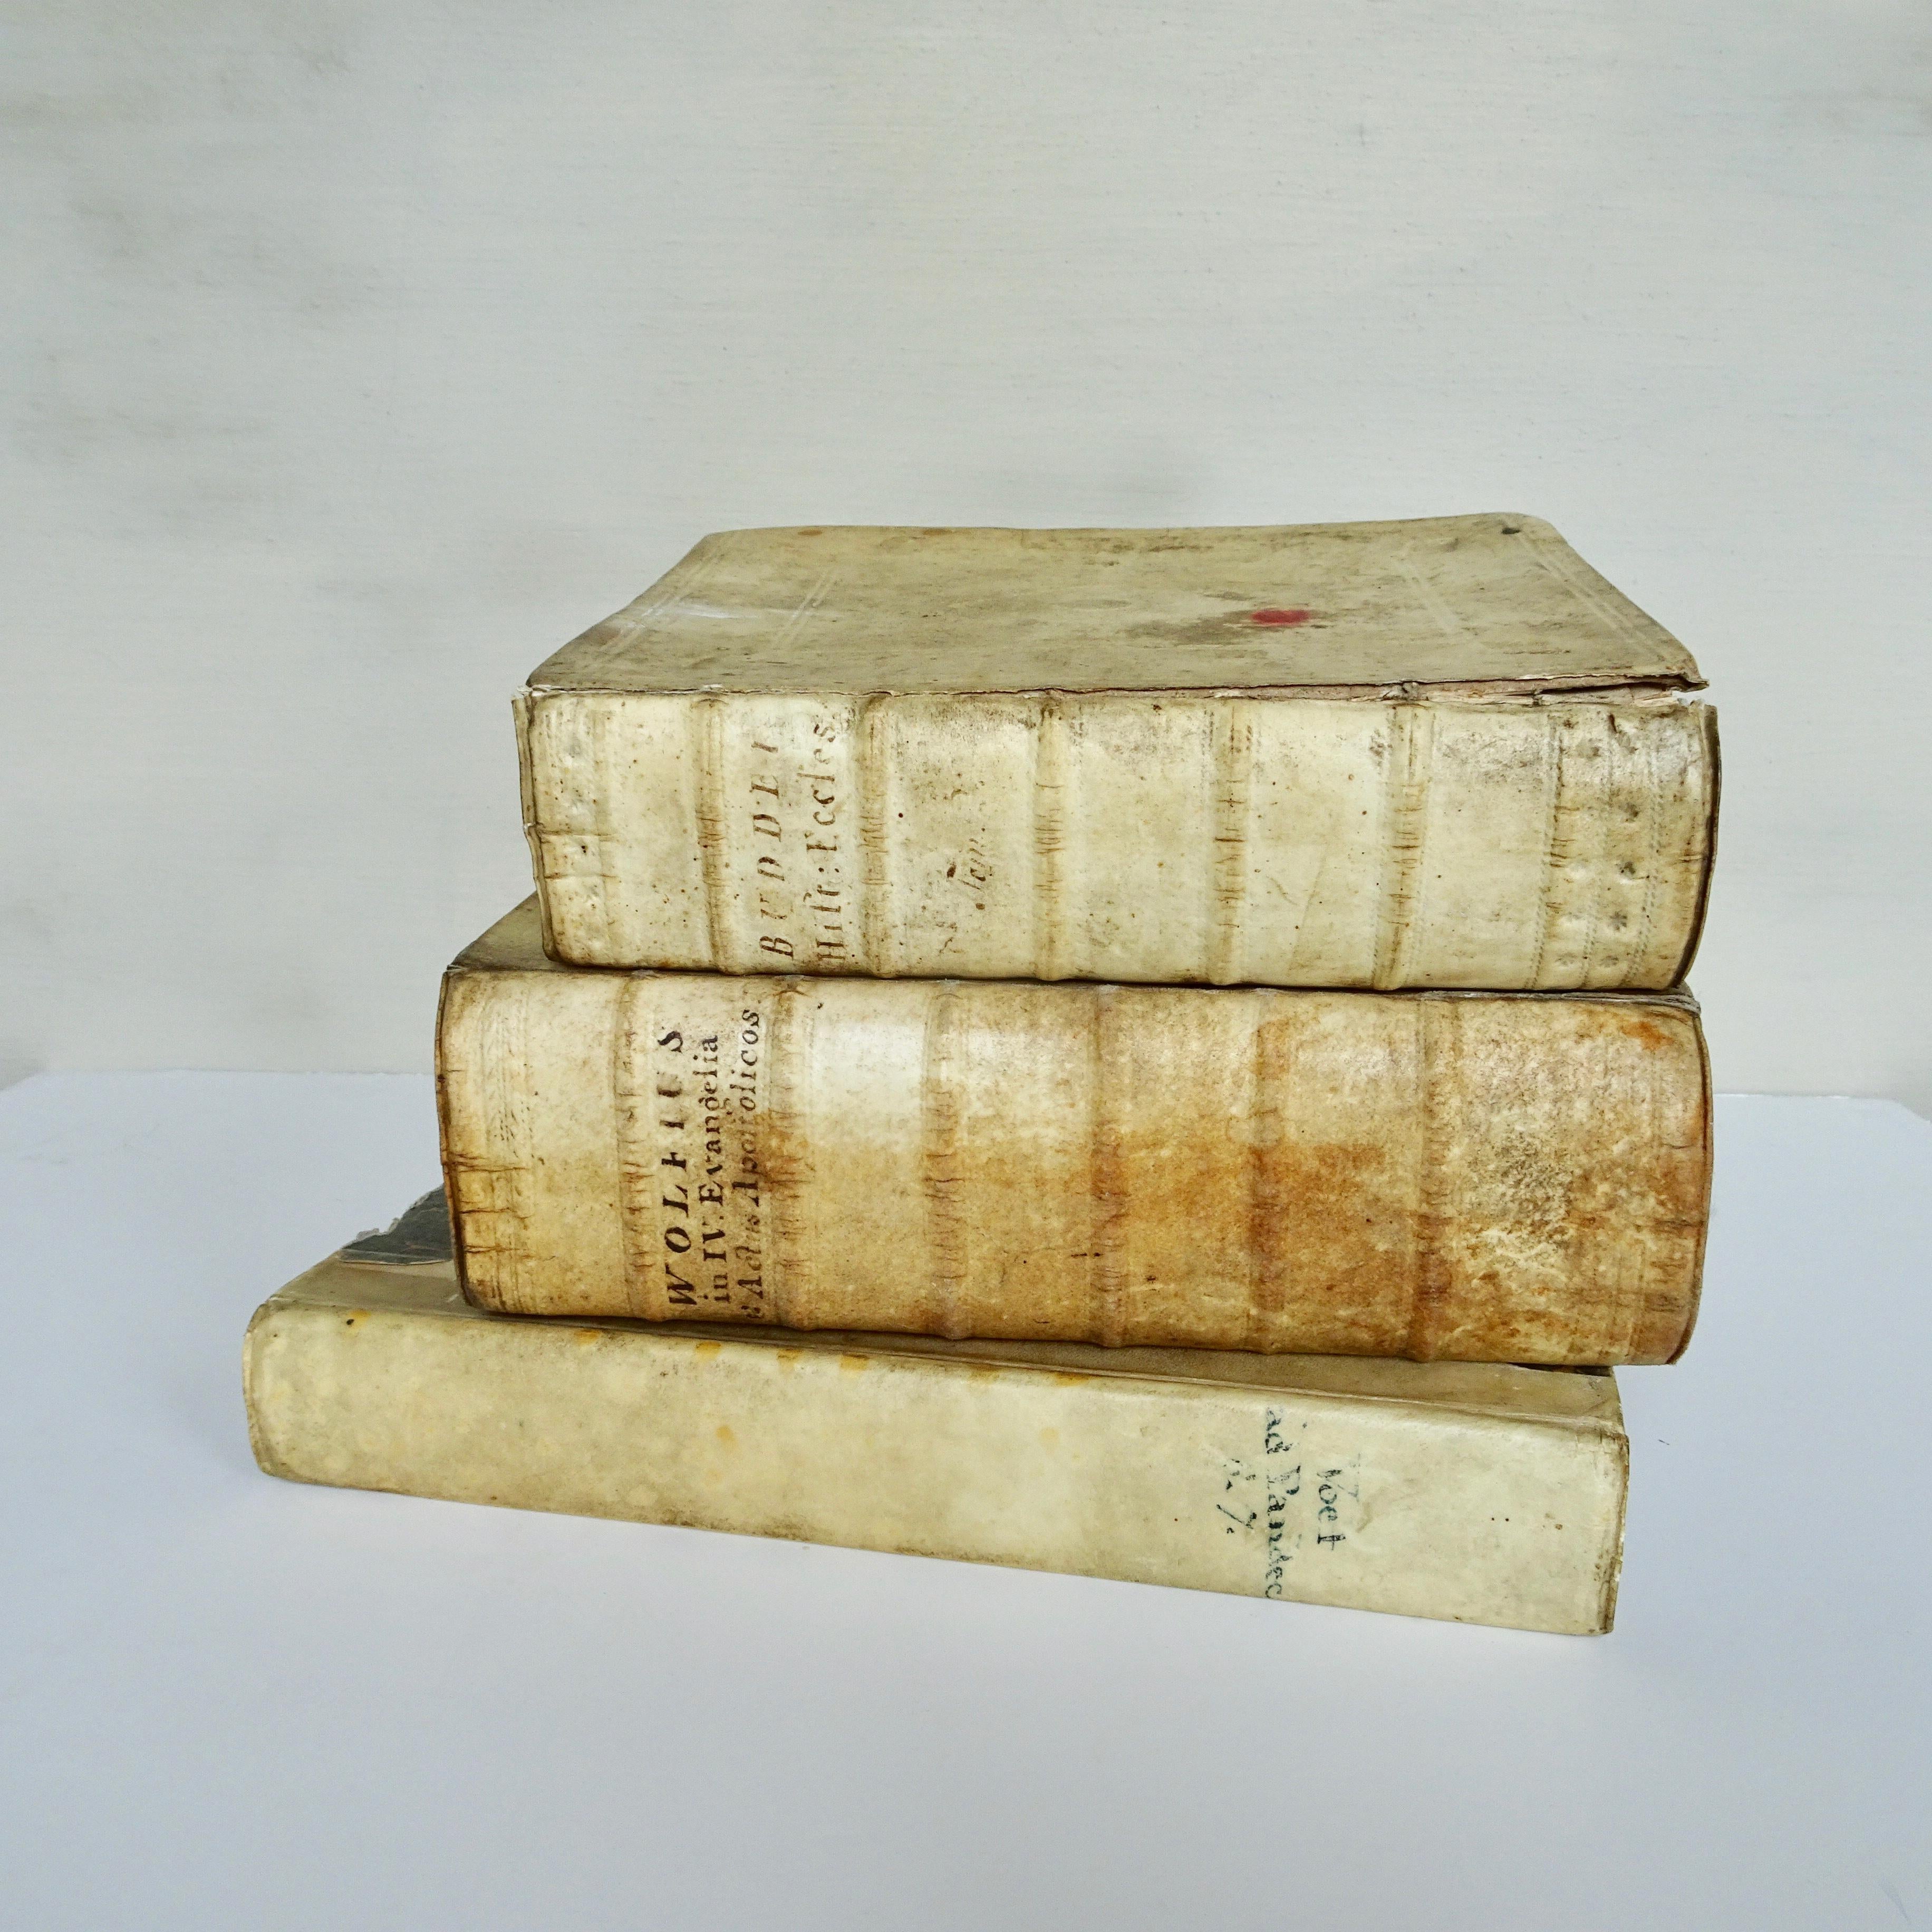 A nice collection of vellum books from the 17th and 18th century in a set of three.